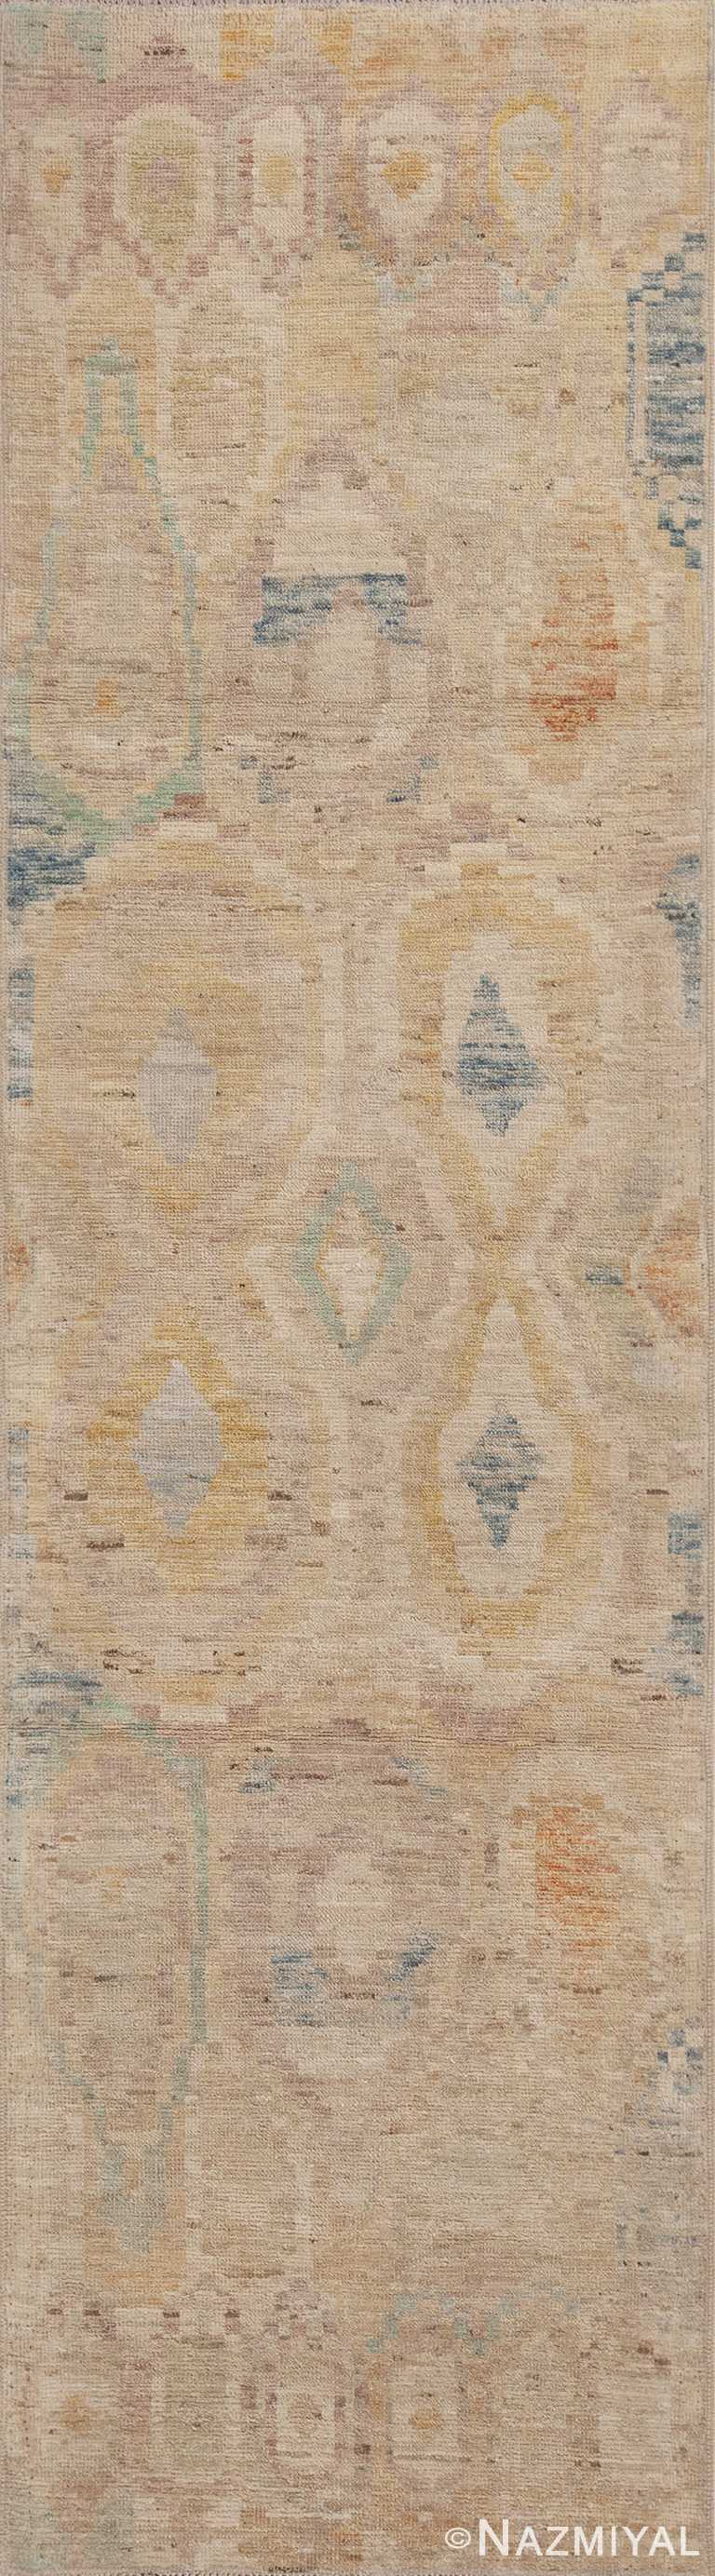 Modern Tribal Warm Cozy Long And Narrow Size Hallway Runner Rug 11019 by Nazmiyal Antique Rugs